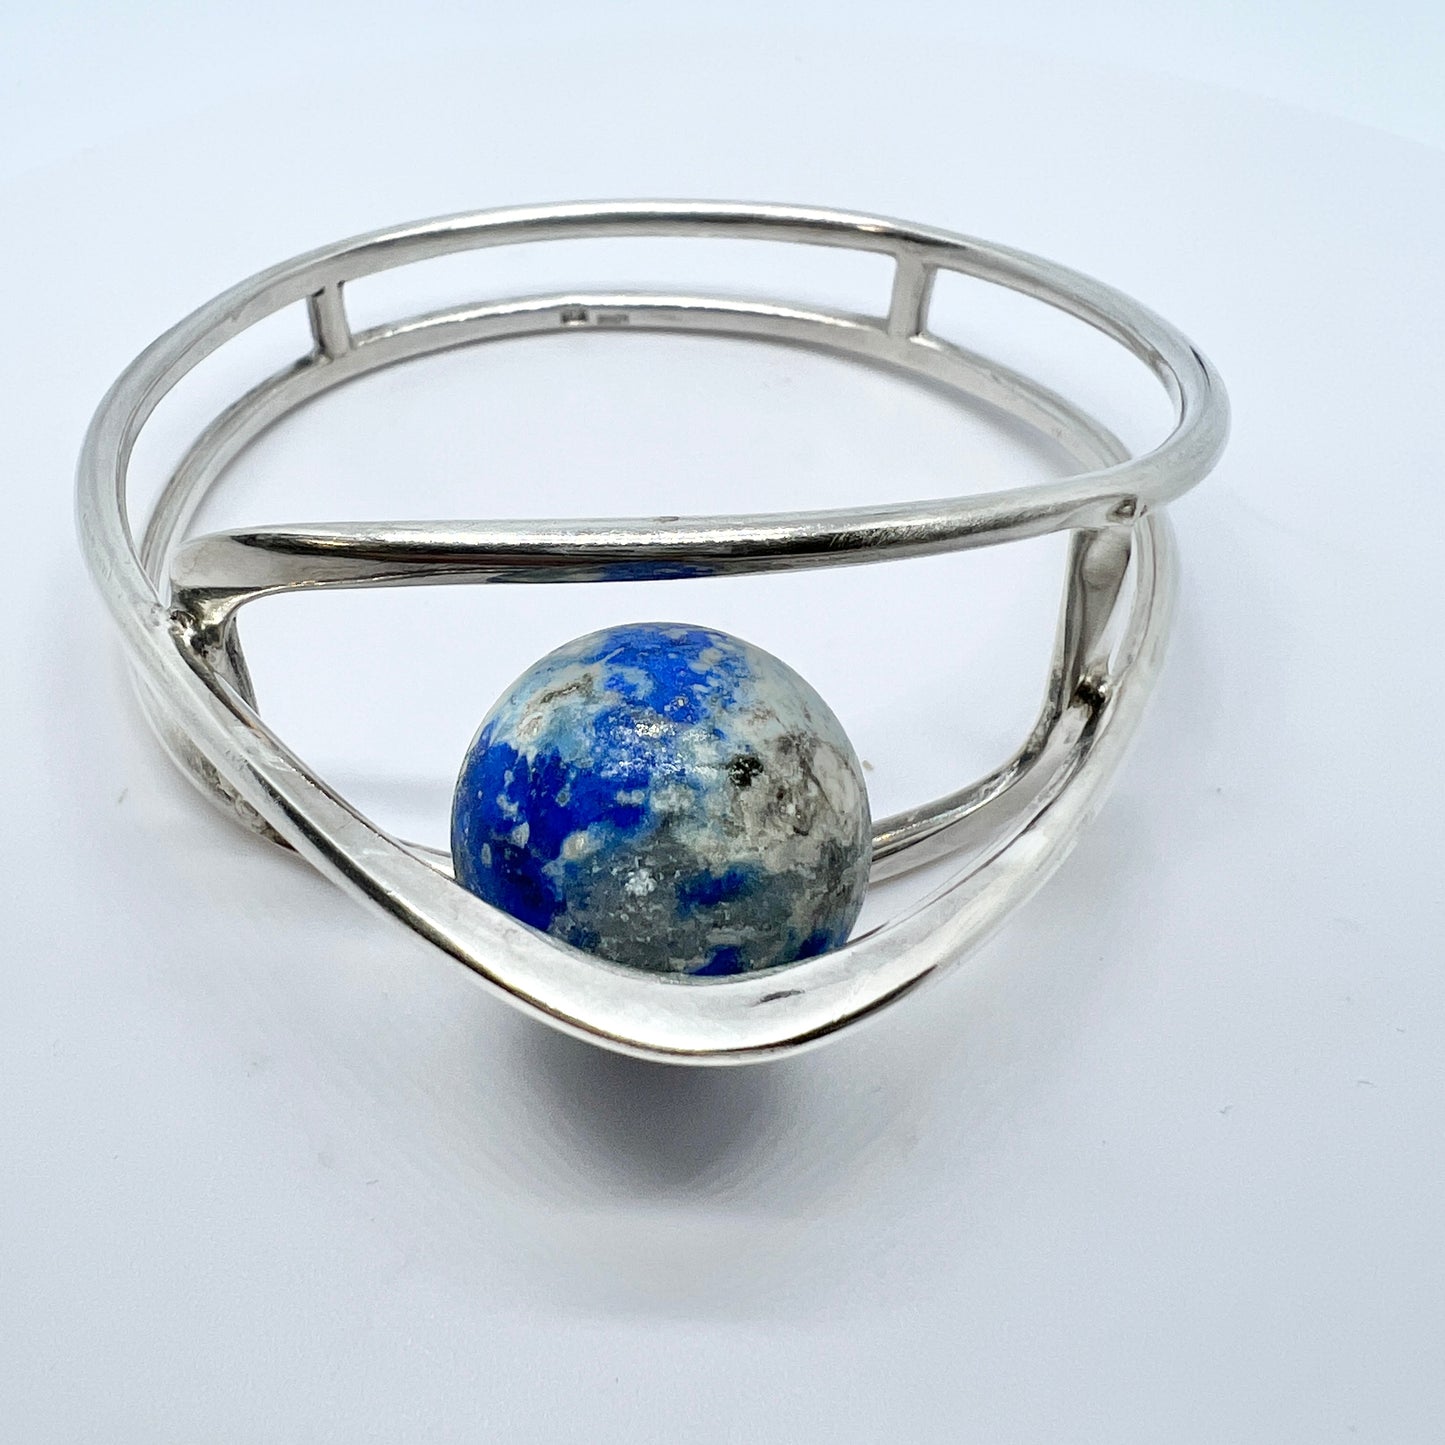 Germany/Austria 1960s. Solid 900 Silver Caged Kinetic Sodalite Ball Bangle Bracelet. Makers Mark.